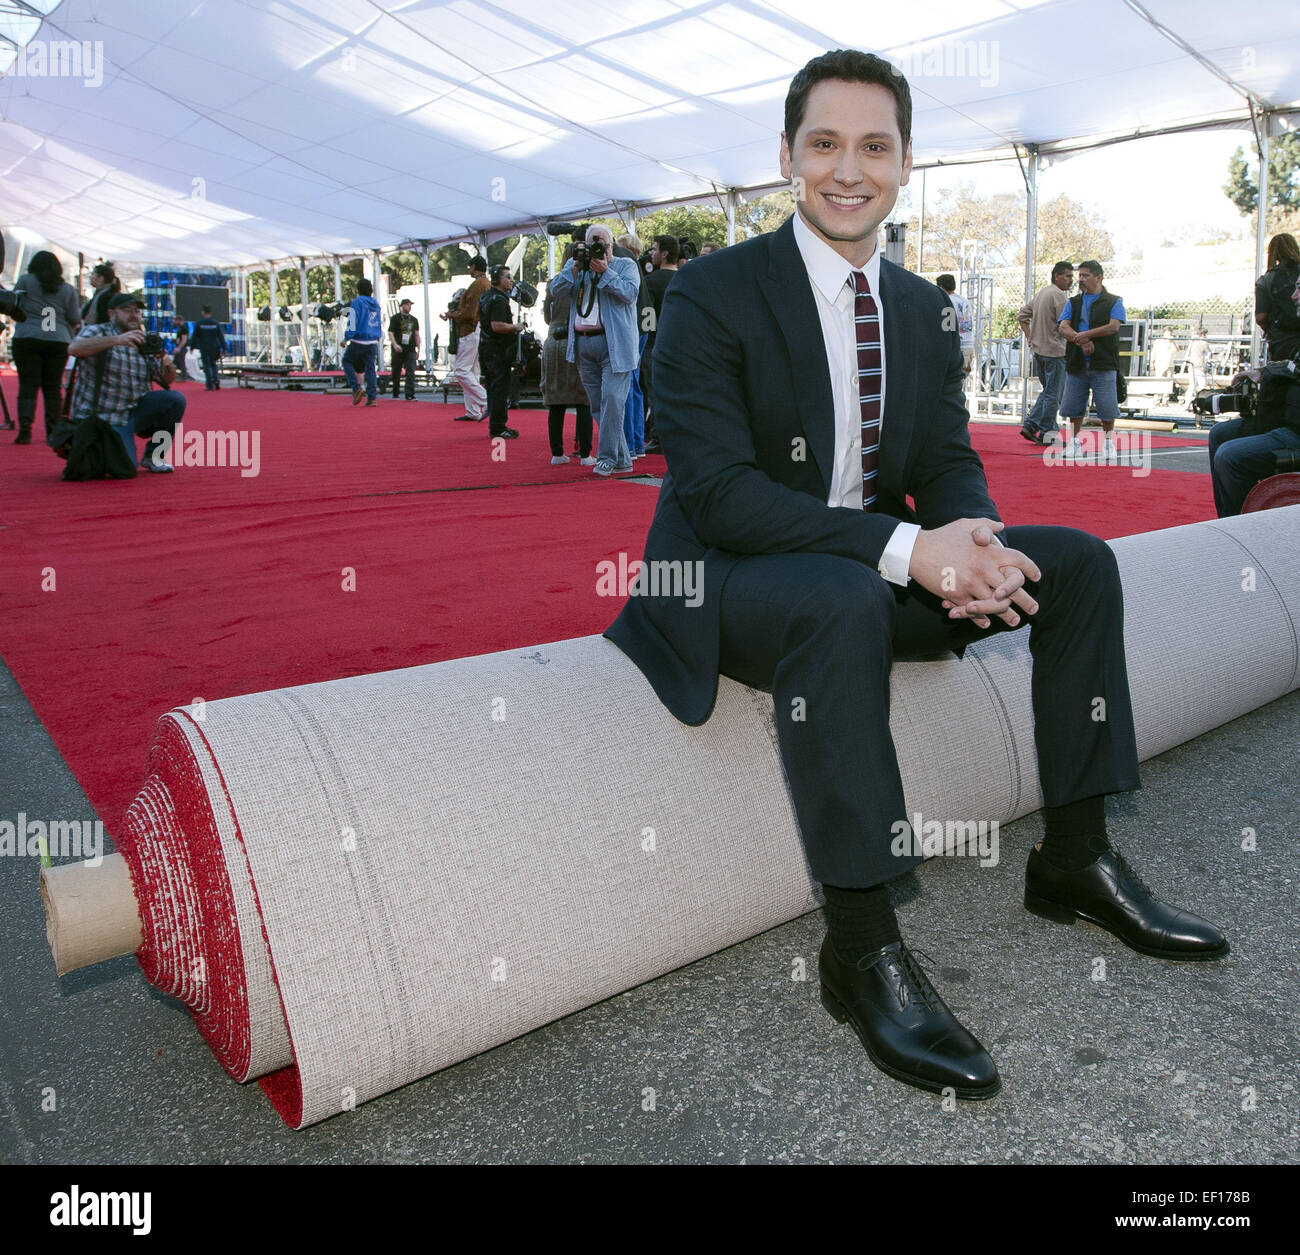 Los Angeles, California, USA. 24th Jan, 2015. American actor Matt McGorry poses for the news media after rolling out the red carpet on Saturday morning.----The 21st Annual 2015 Screen Actors Guild Awards preparations were underway at the Shrine Auditorium in Los Angeles as workers set up tents, stages, bleachers and displays on Saturday. American actor Matt McGorry, 'Orange is the New Black' nominee, led the ceremonial rolling out of the red carpet with Local 33 Props and Carpenters, Local 800, Art Directors as well as Sag Award Comittee Vice Chair Daryl Anderson and American actor Woody Sch Stock Photo